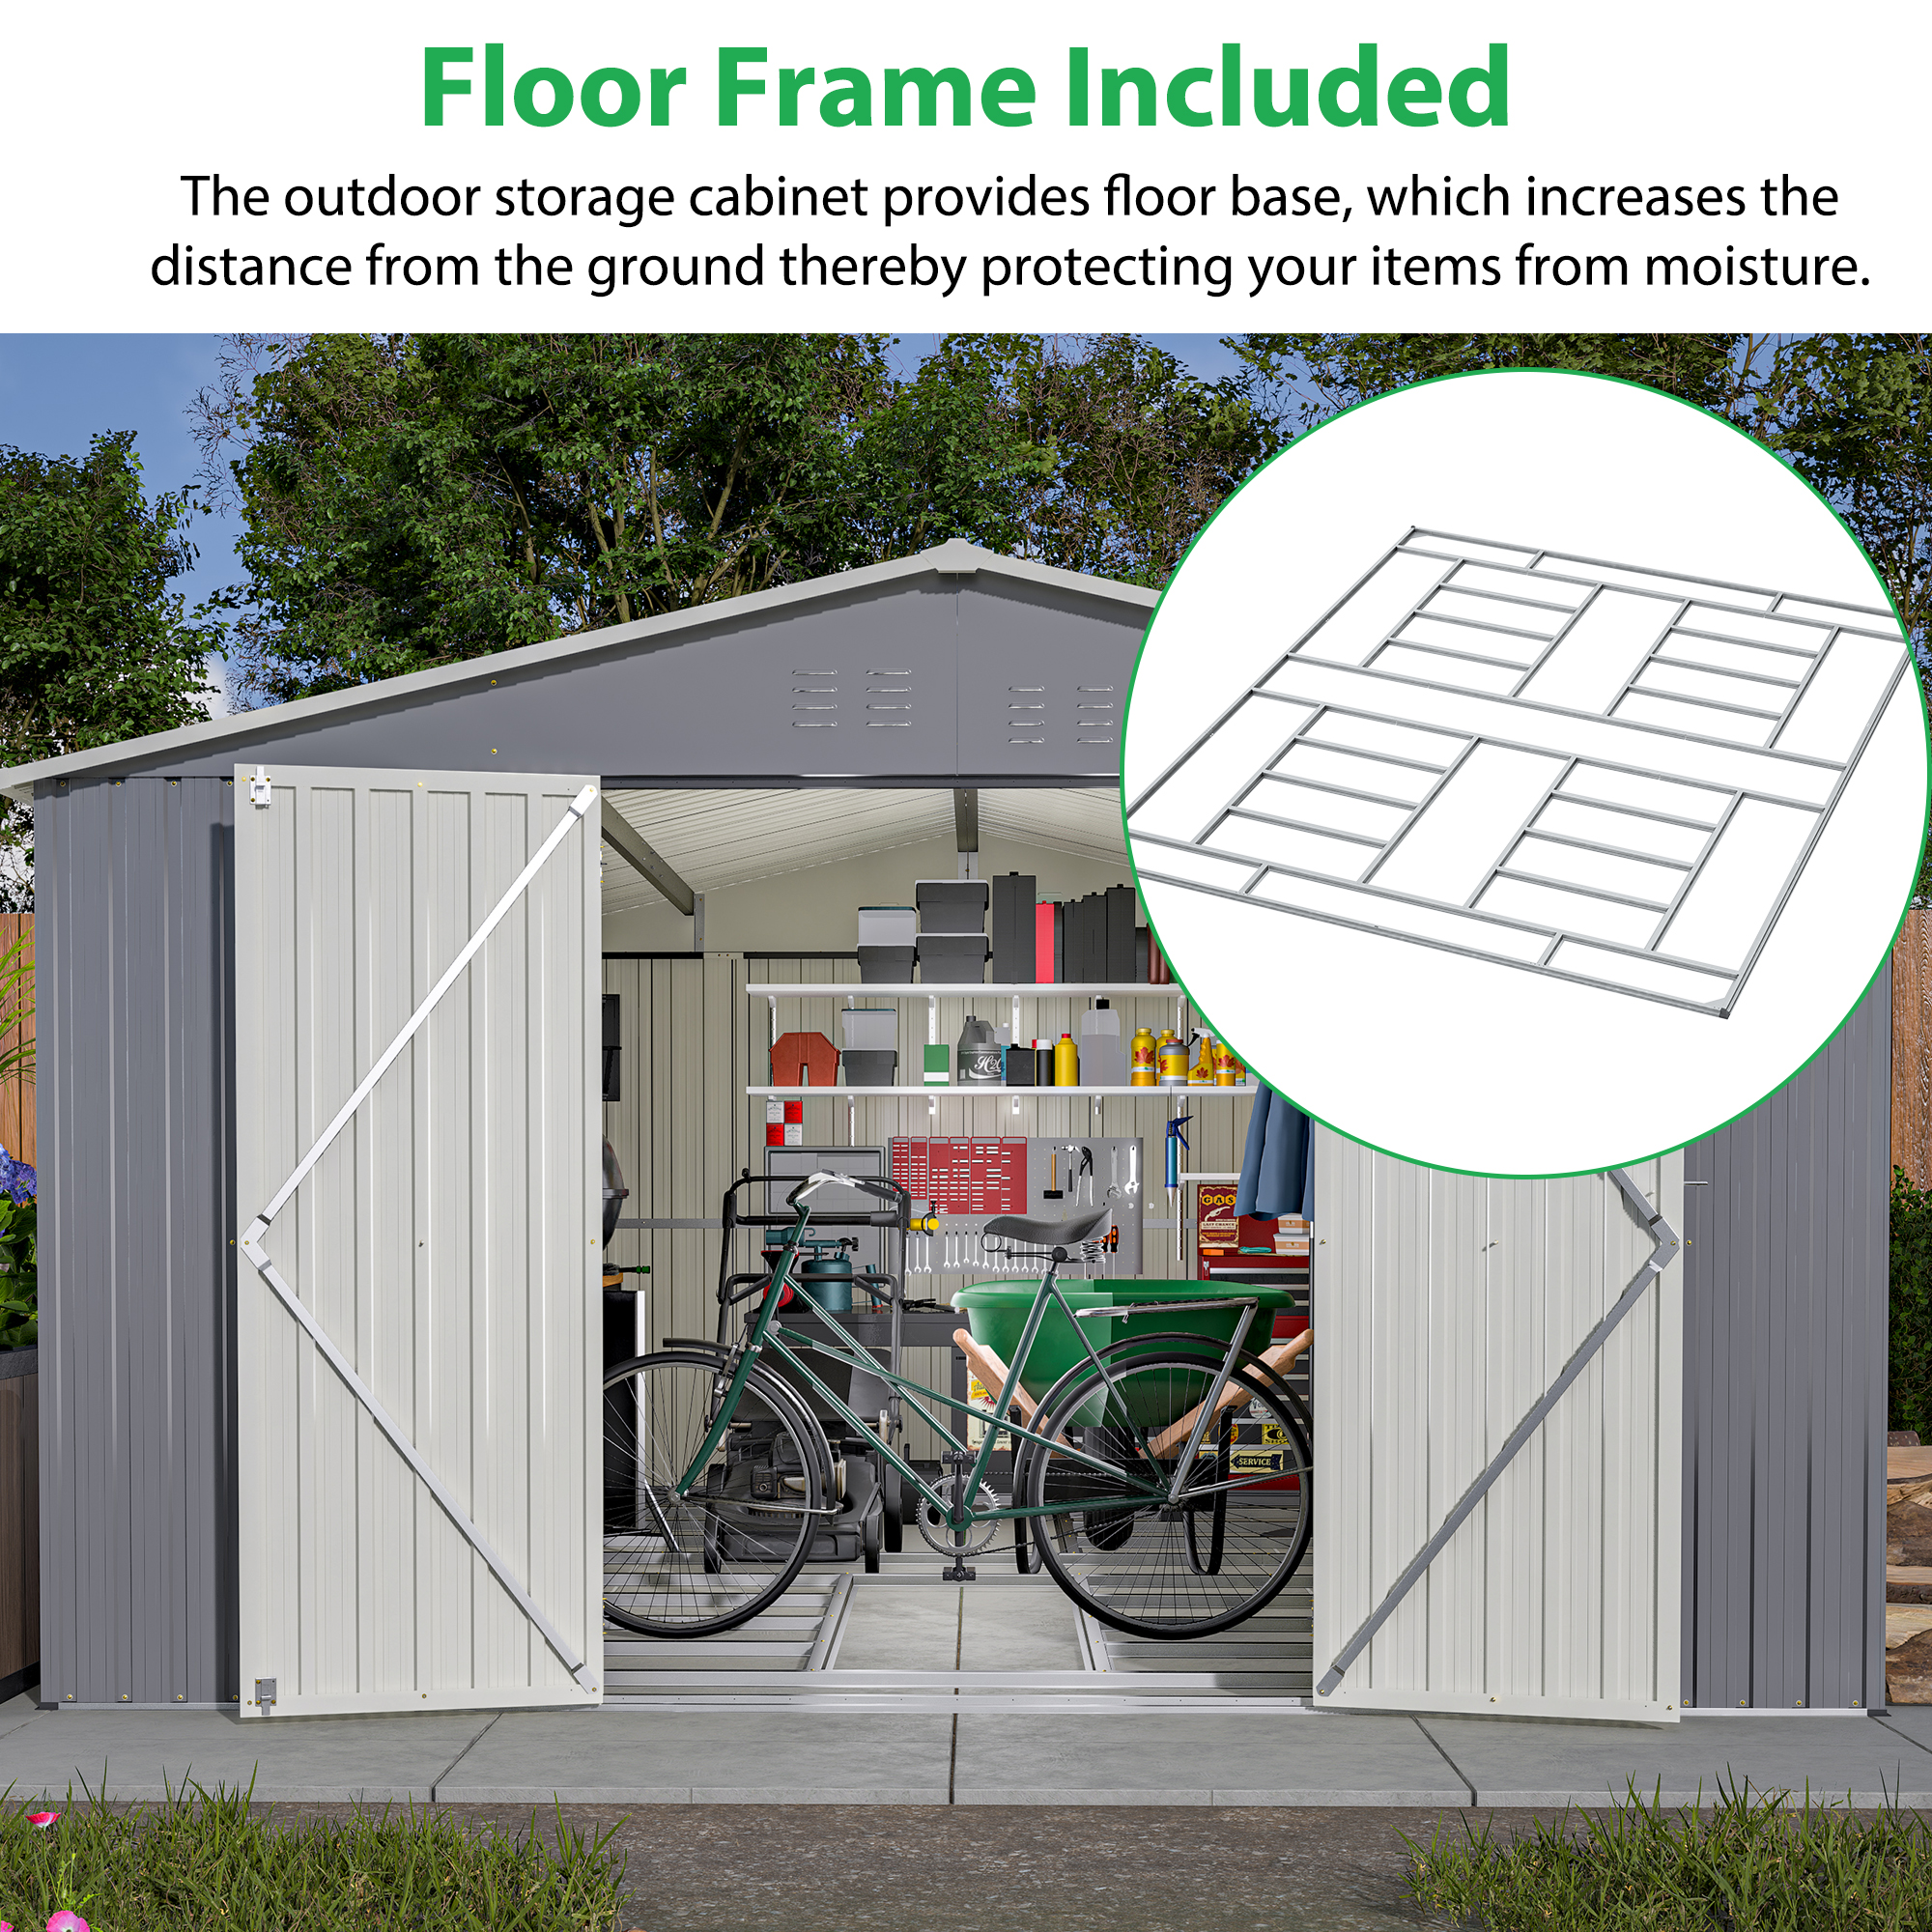 LZBEITEM 11 x 13 ft. Outdoor Metal Storage Shed with Floor Frame Kit, Galvanized Steel Garden Shed, Metal Garden Tool Shed with Lockable for Backyard Patio, Gray, 133.68 x 161.4 x 80.76 in，140.5 sq ft - image 5 of 13